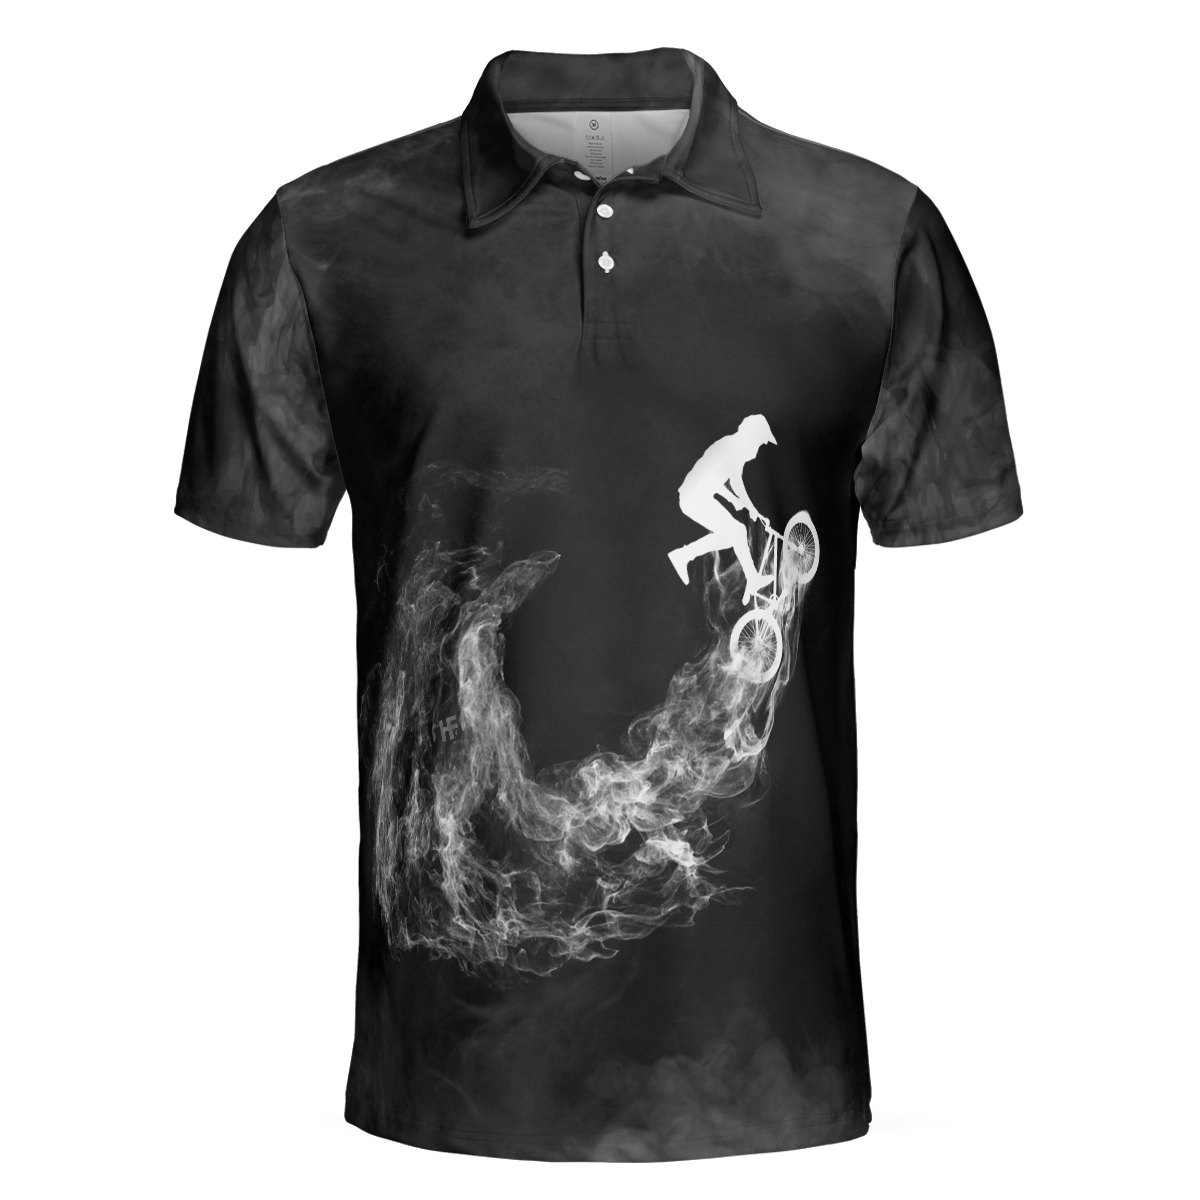 Cycling On Smoke Background Polo Shirt, Black And White Cycling